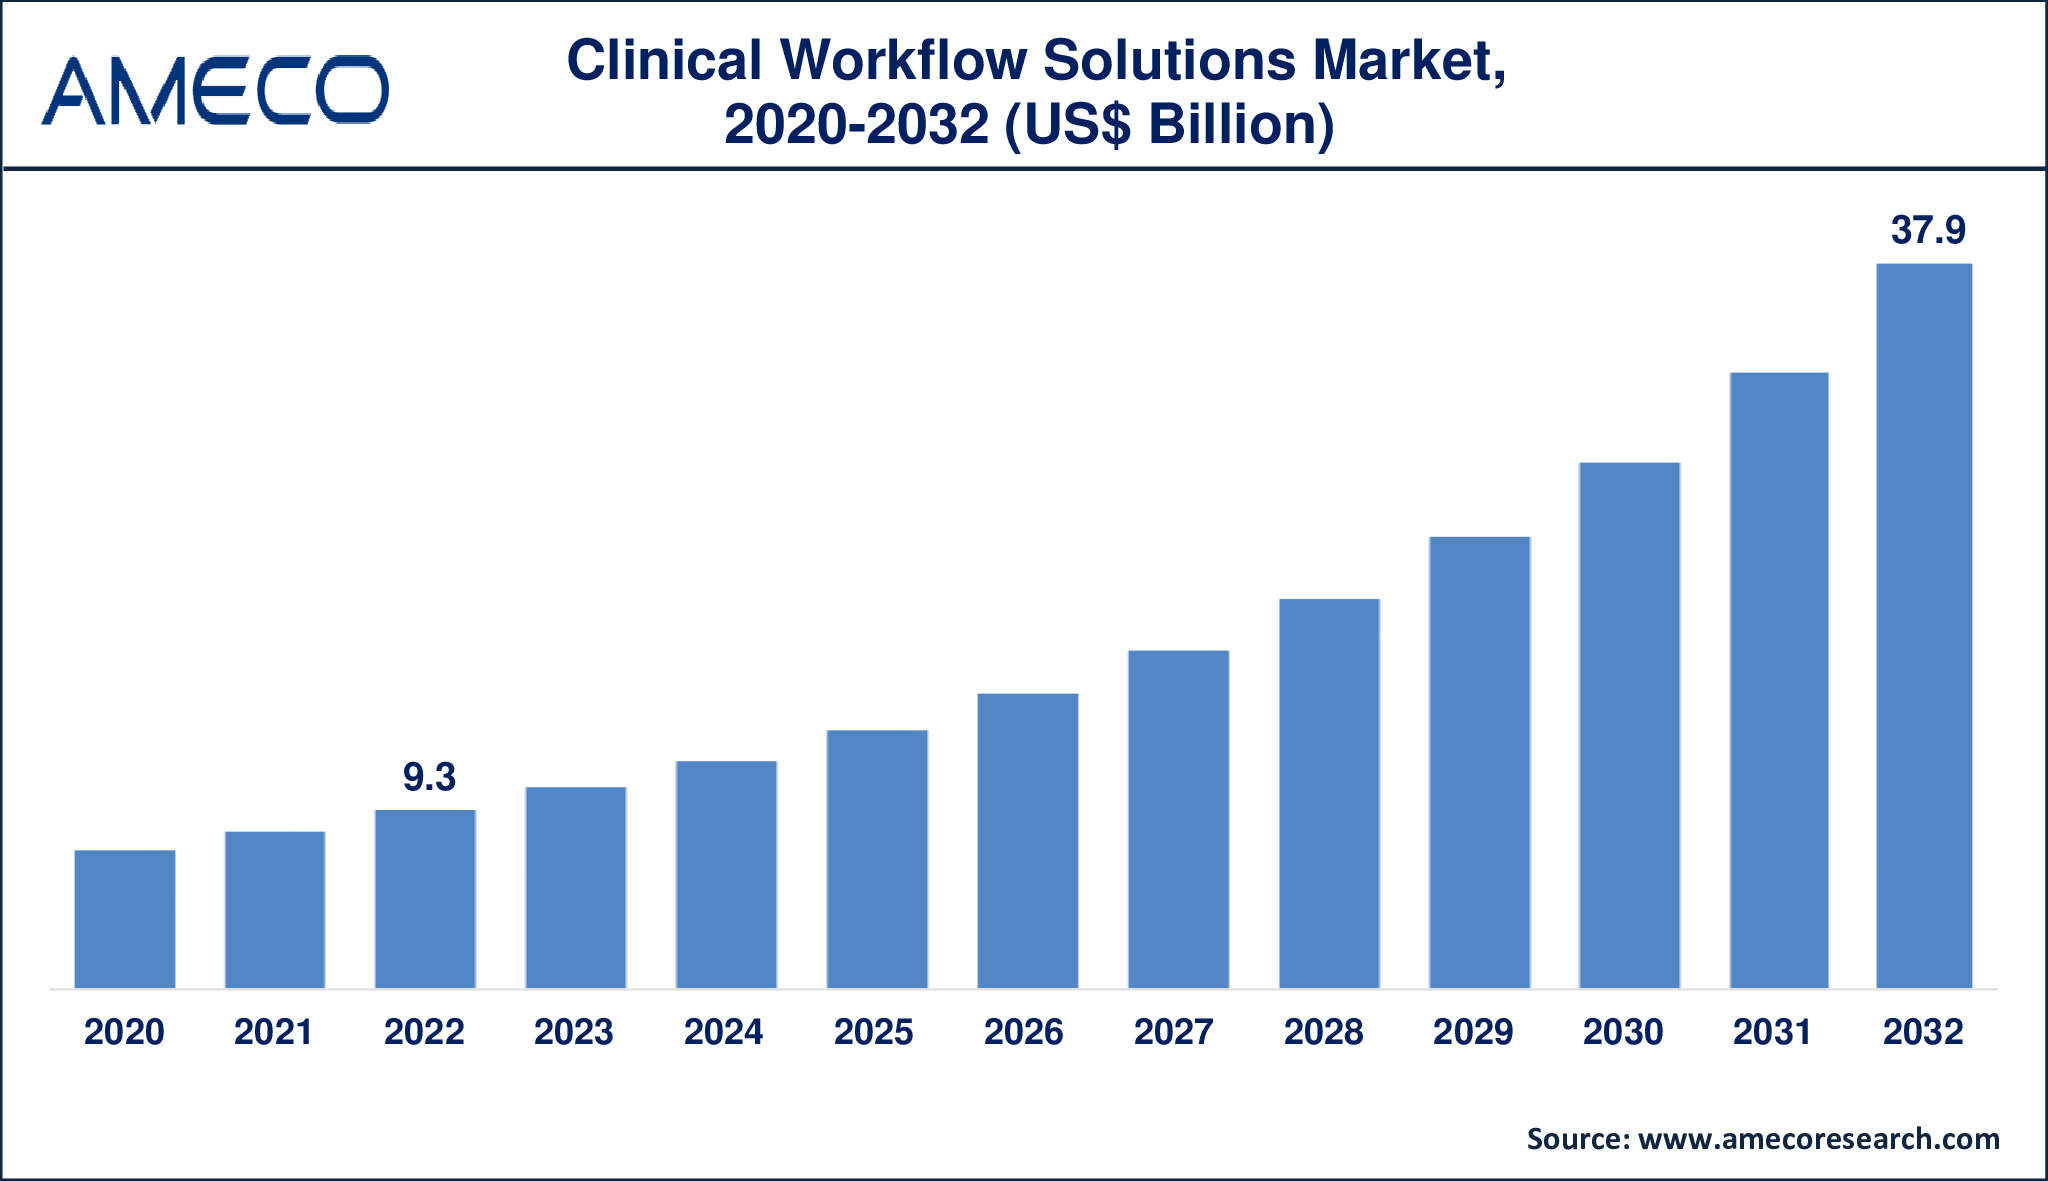 Clinical Workflow Solutions Market Dynamics